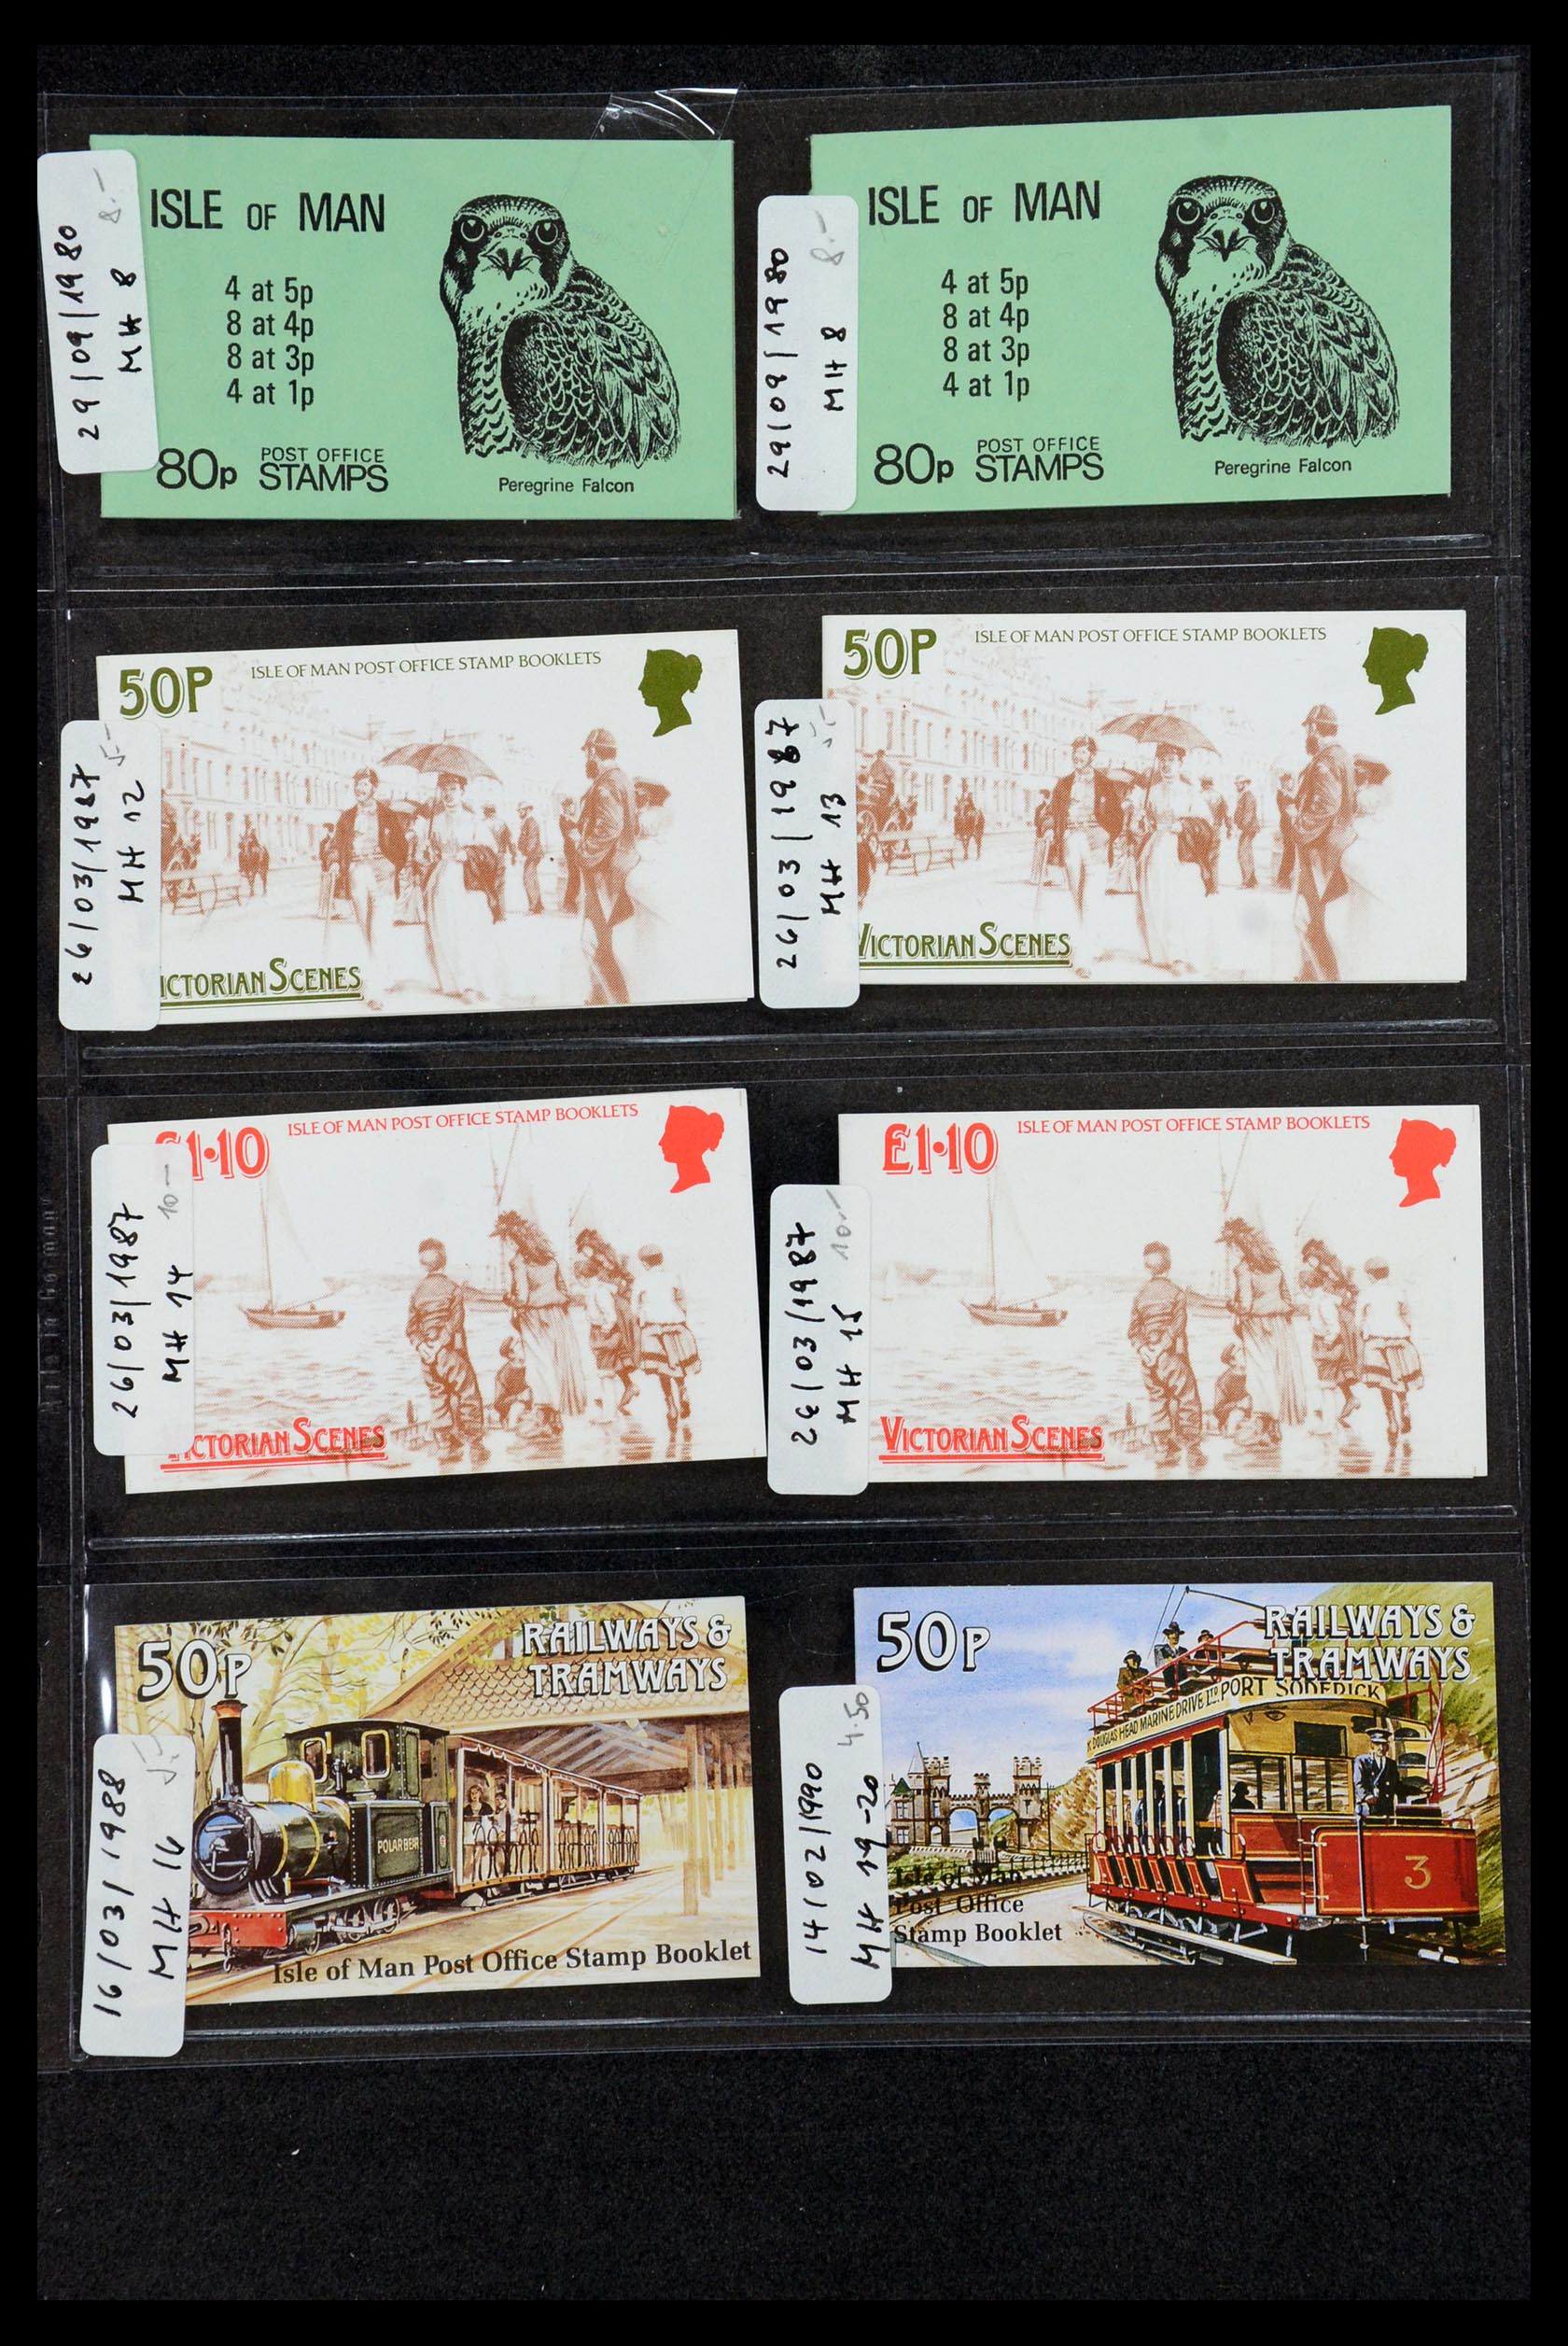 35977 027 - Stamp collection 35977 Isle of Man stamp booklets 1973-2015!